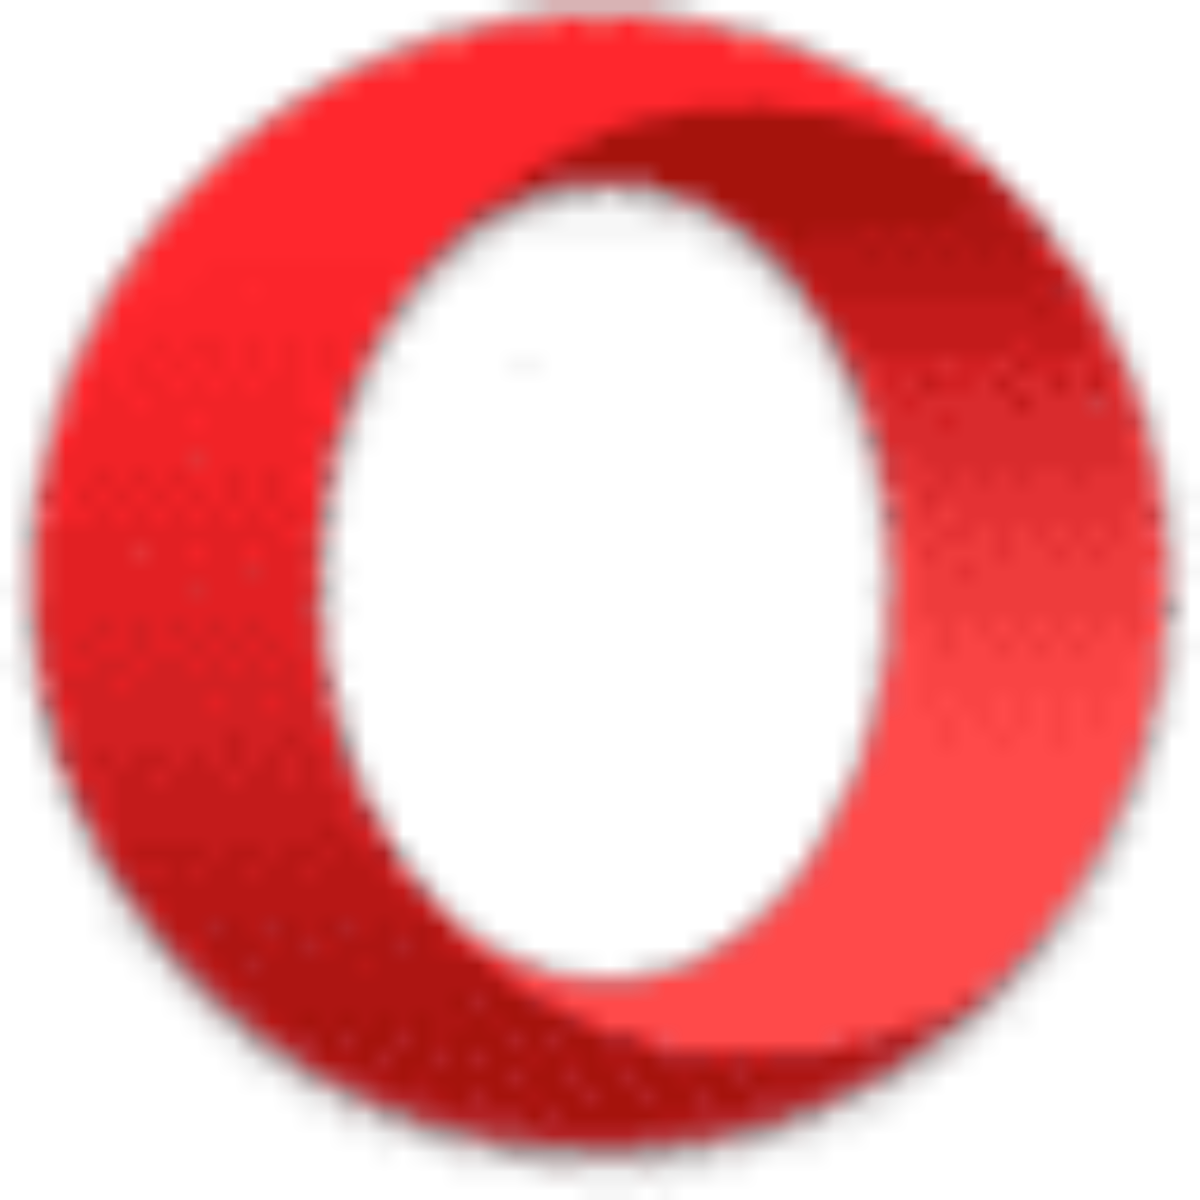 Opera Mini Offline Installer For Pc : Opera Free Download For Windows Mac Latest Version - For all opera lovers, opera 56 stable version has been released along with many interesting features and updates.